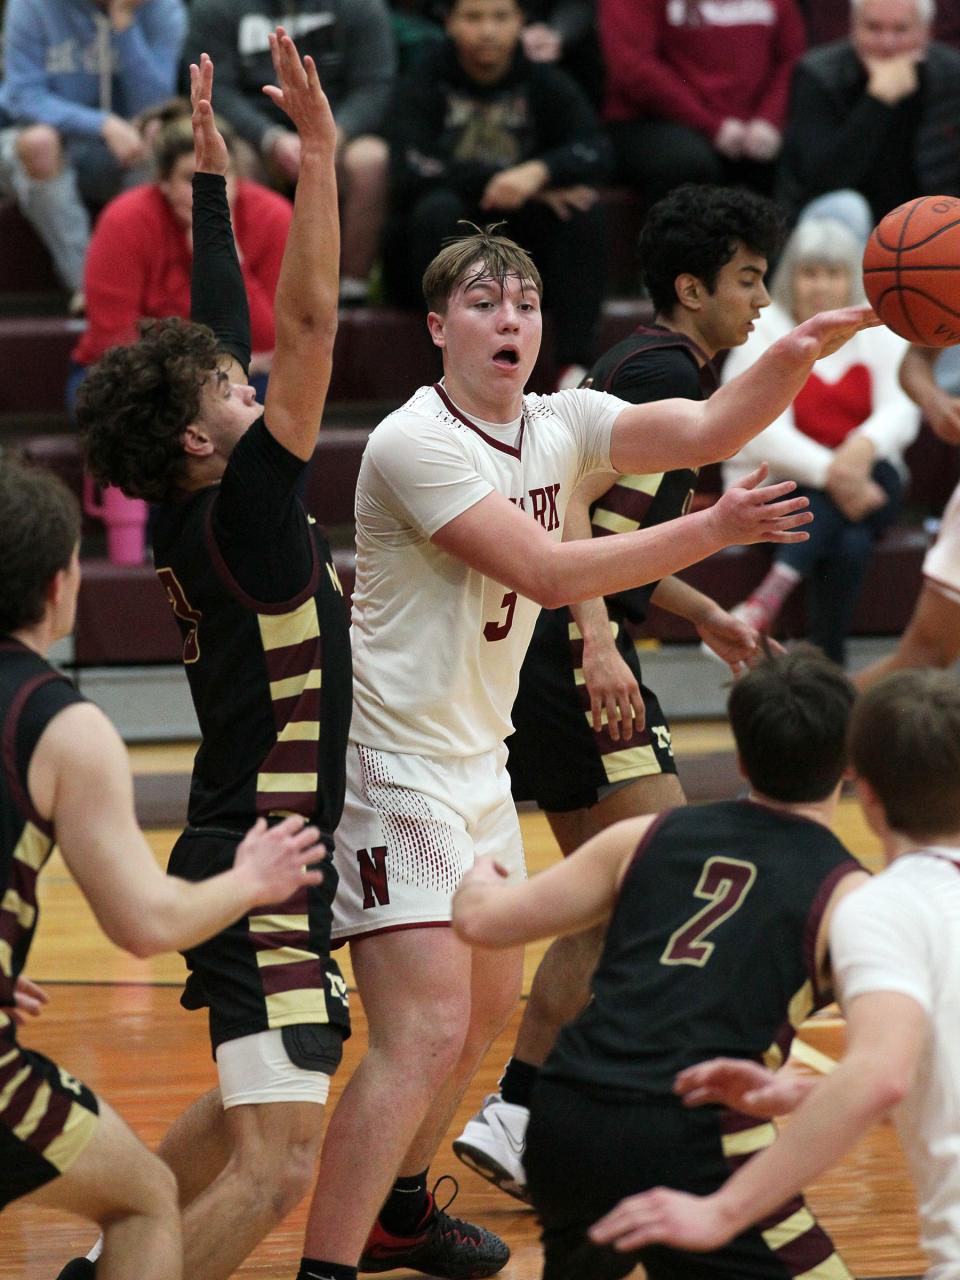 Newark junior Steele Meister passes out of the paint during the Wildcats' 58-36 victory over New Albany at Jimmy Allen Gymnasium on Friday, Feb. 24, 2023, advancing them to the Division I district semifinals Wednesday against Gahanna. Meister scored 18 points.